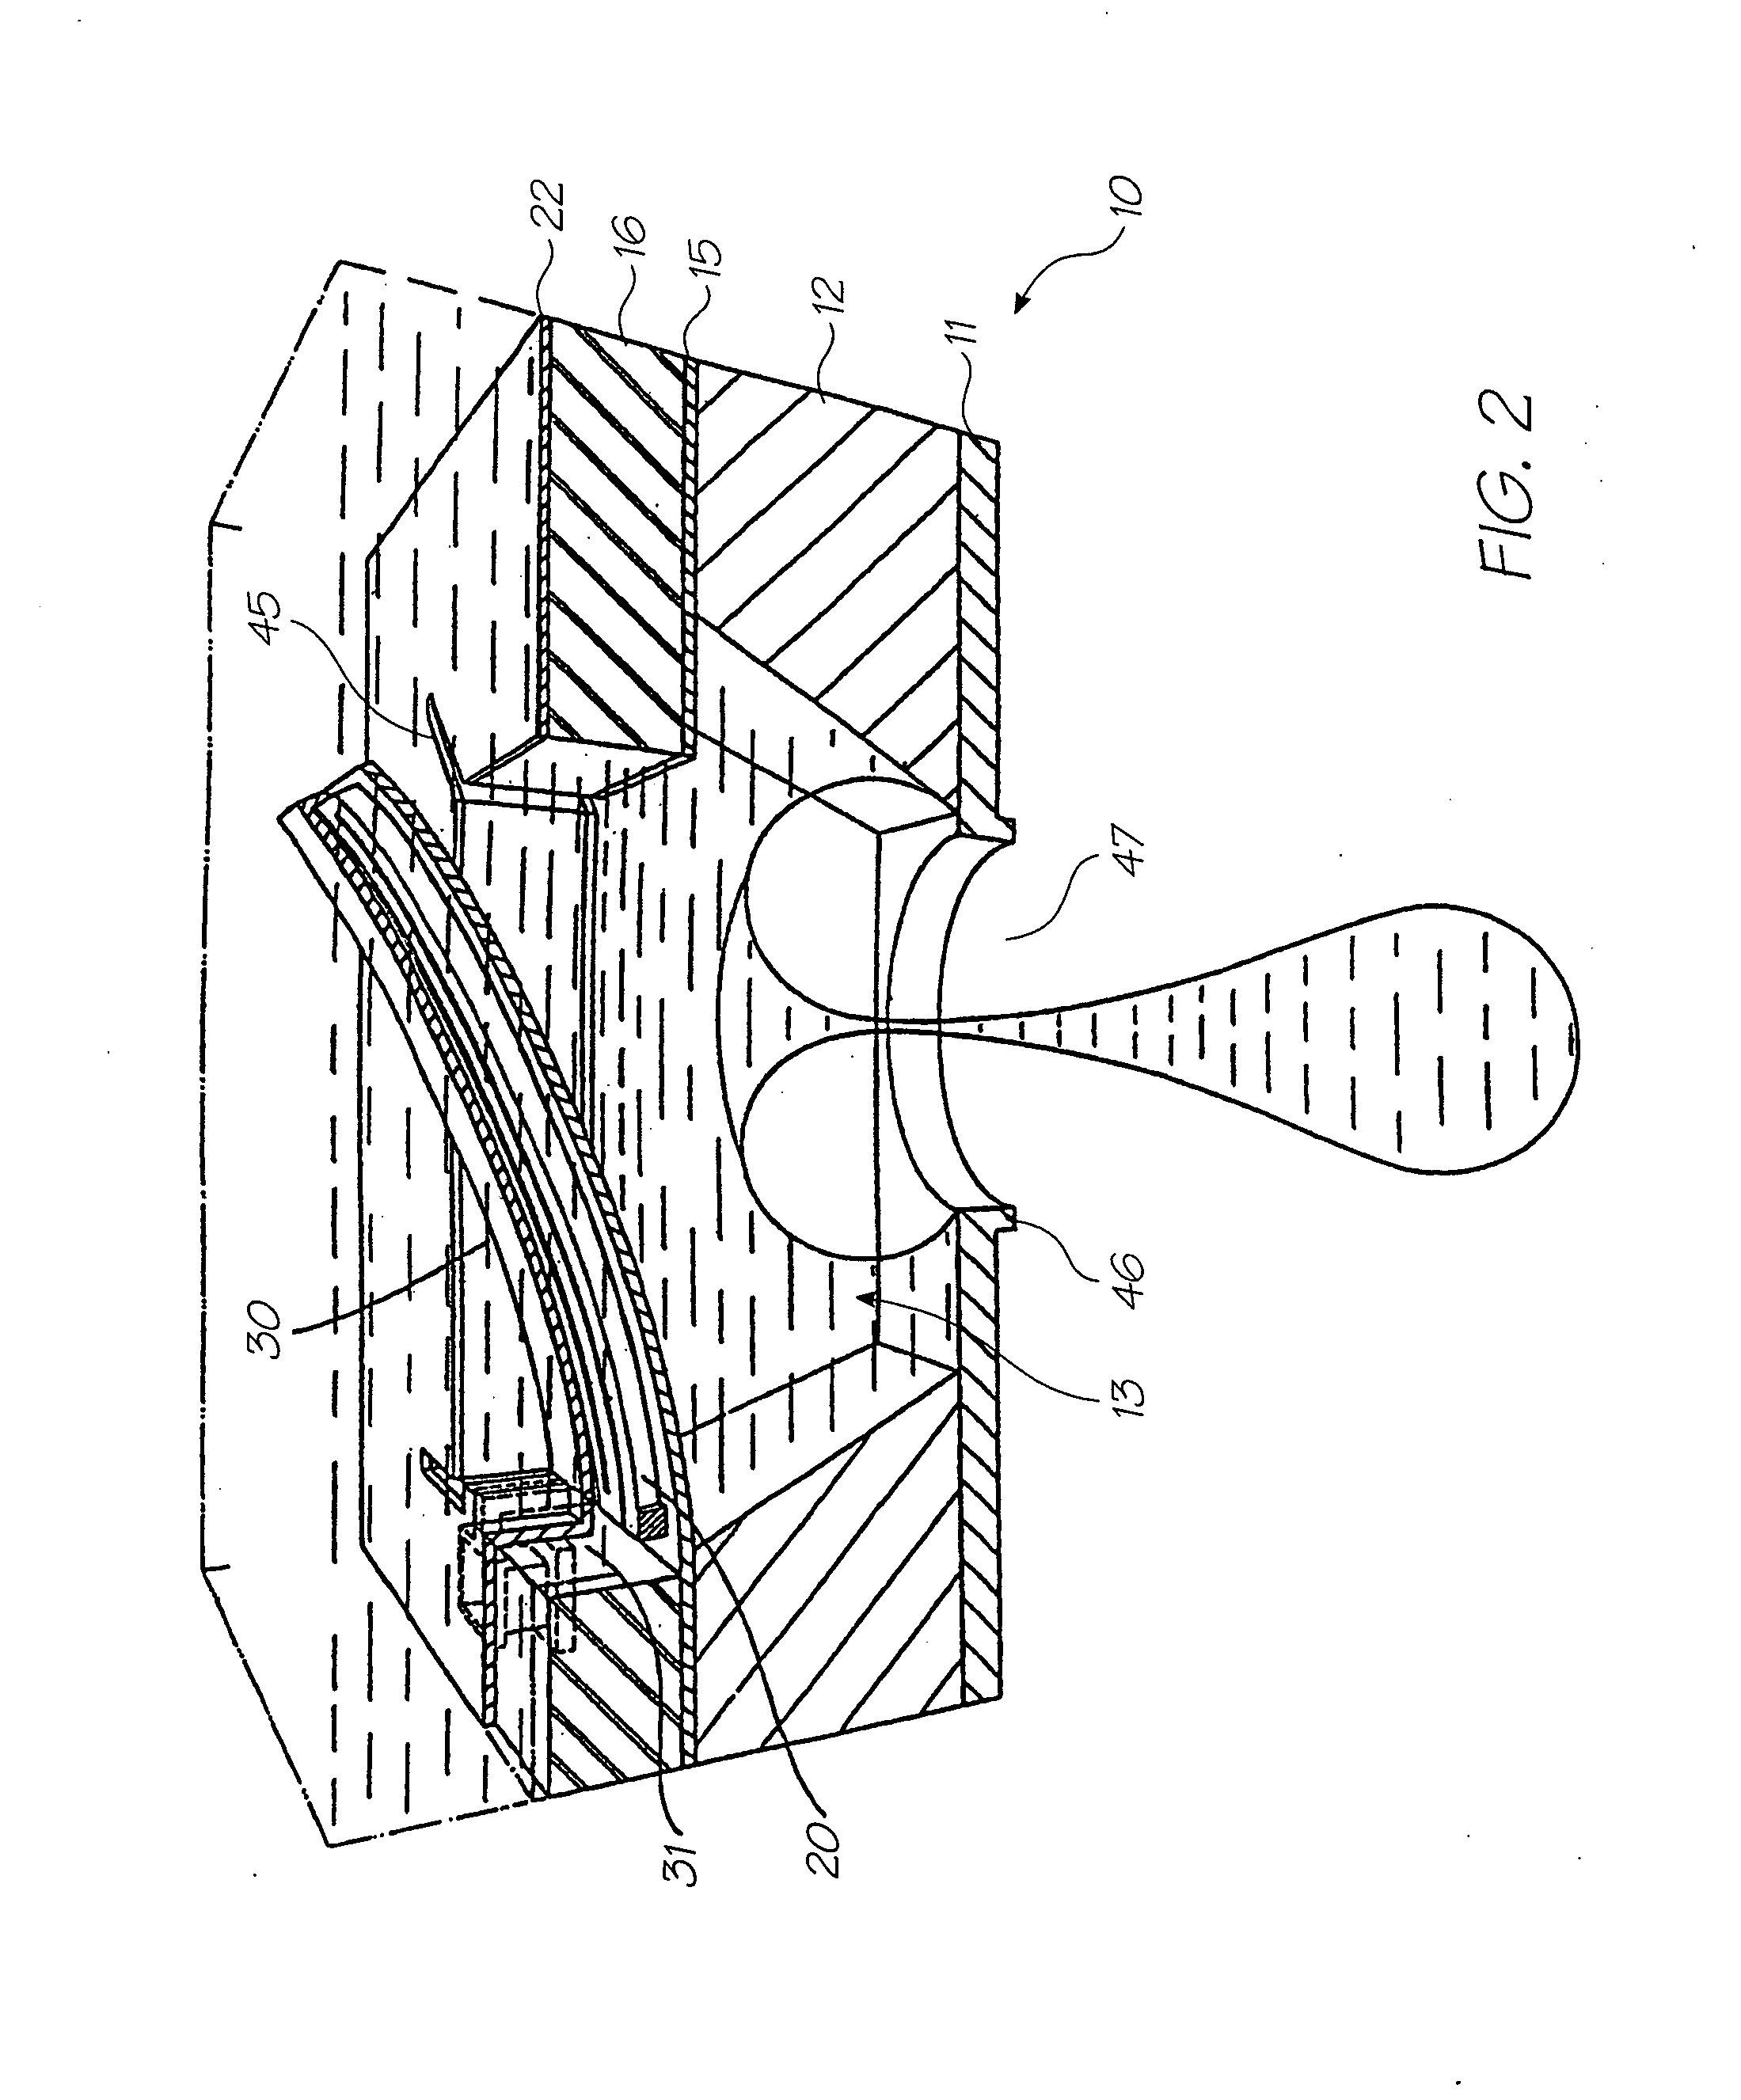 Printhead integrated circuit with low power operation